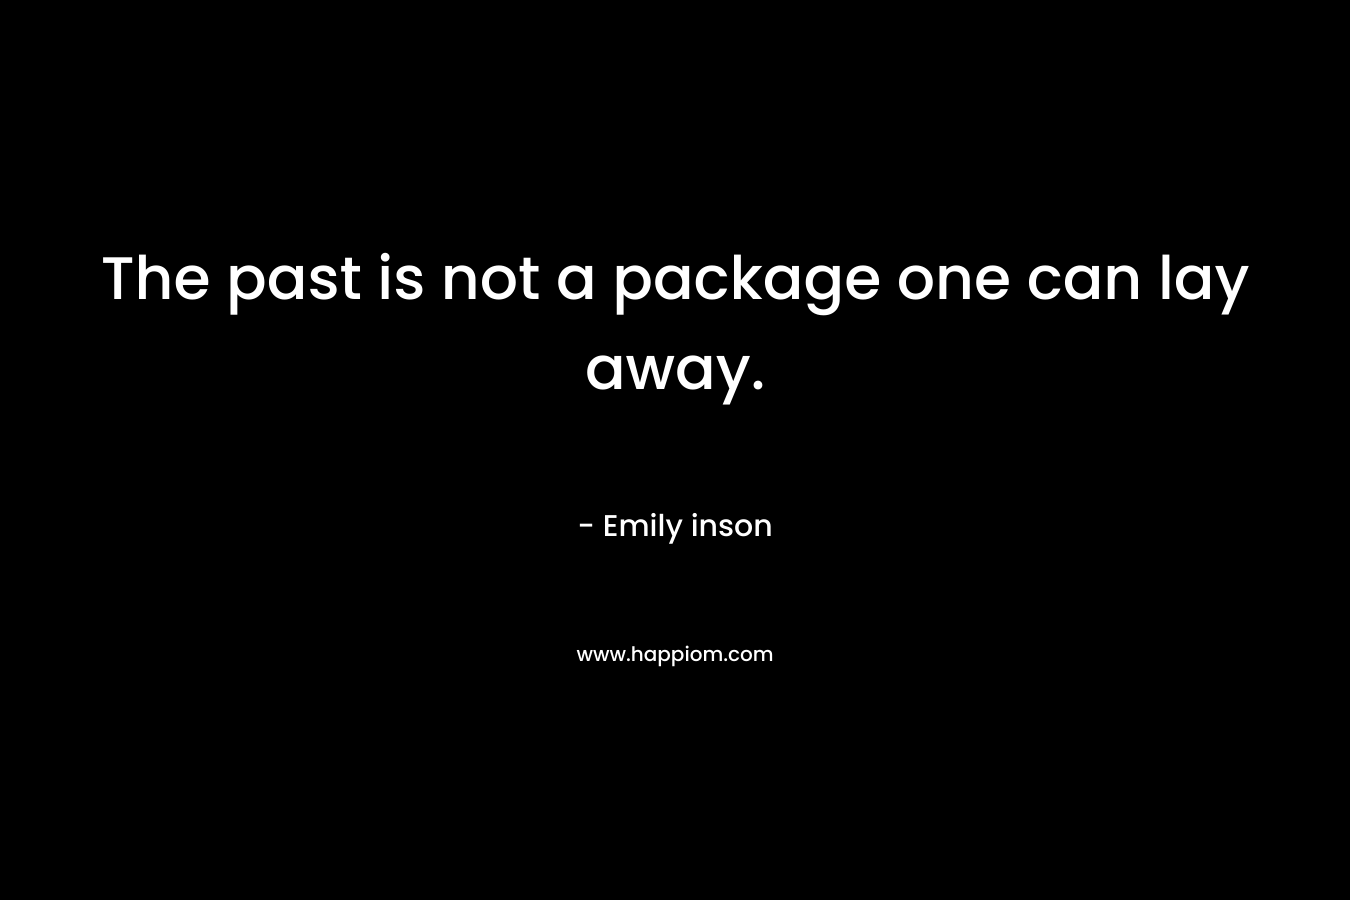 The past is not a package one can lay away. – Emily inson